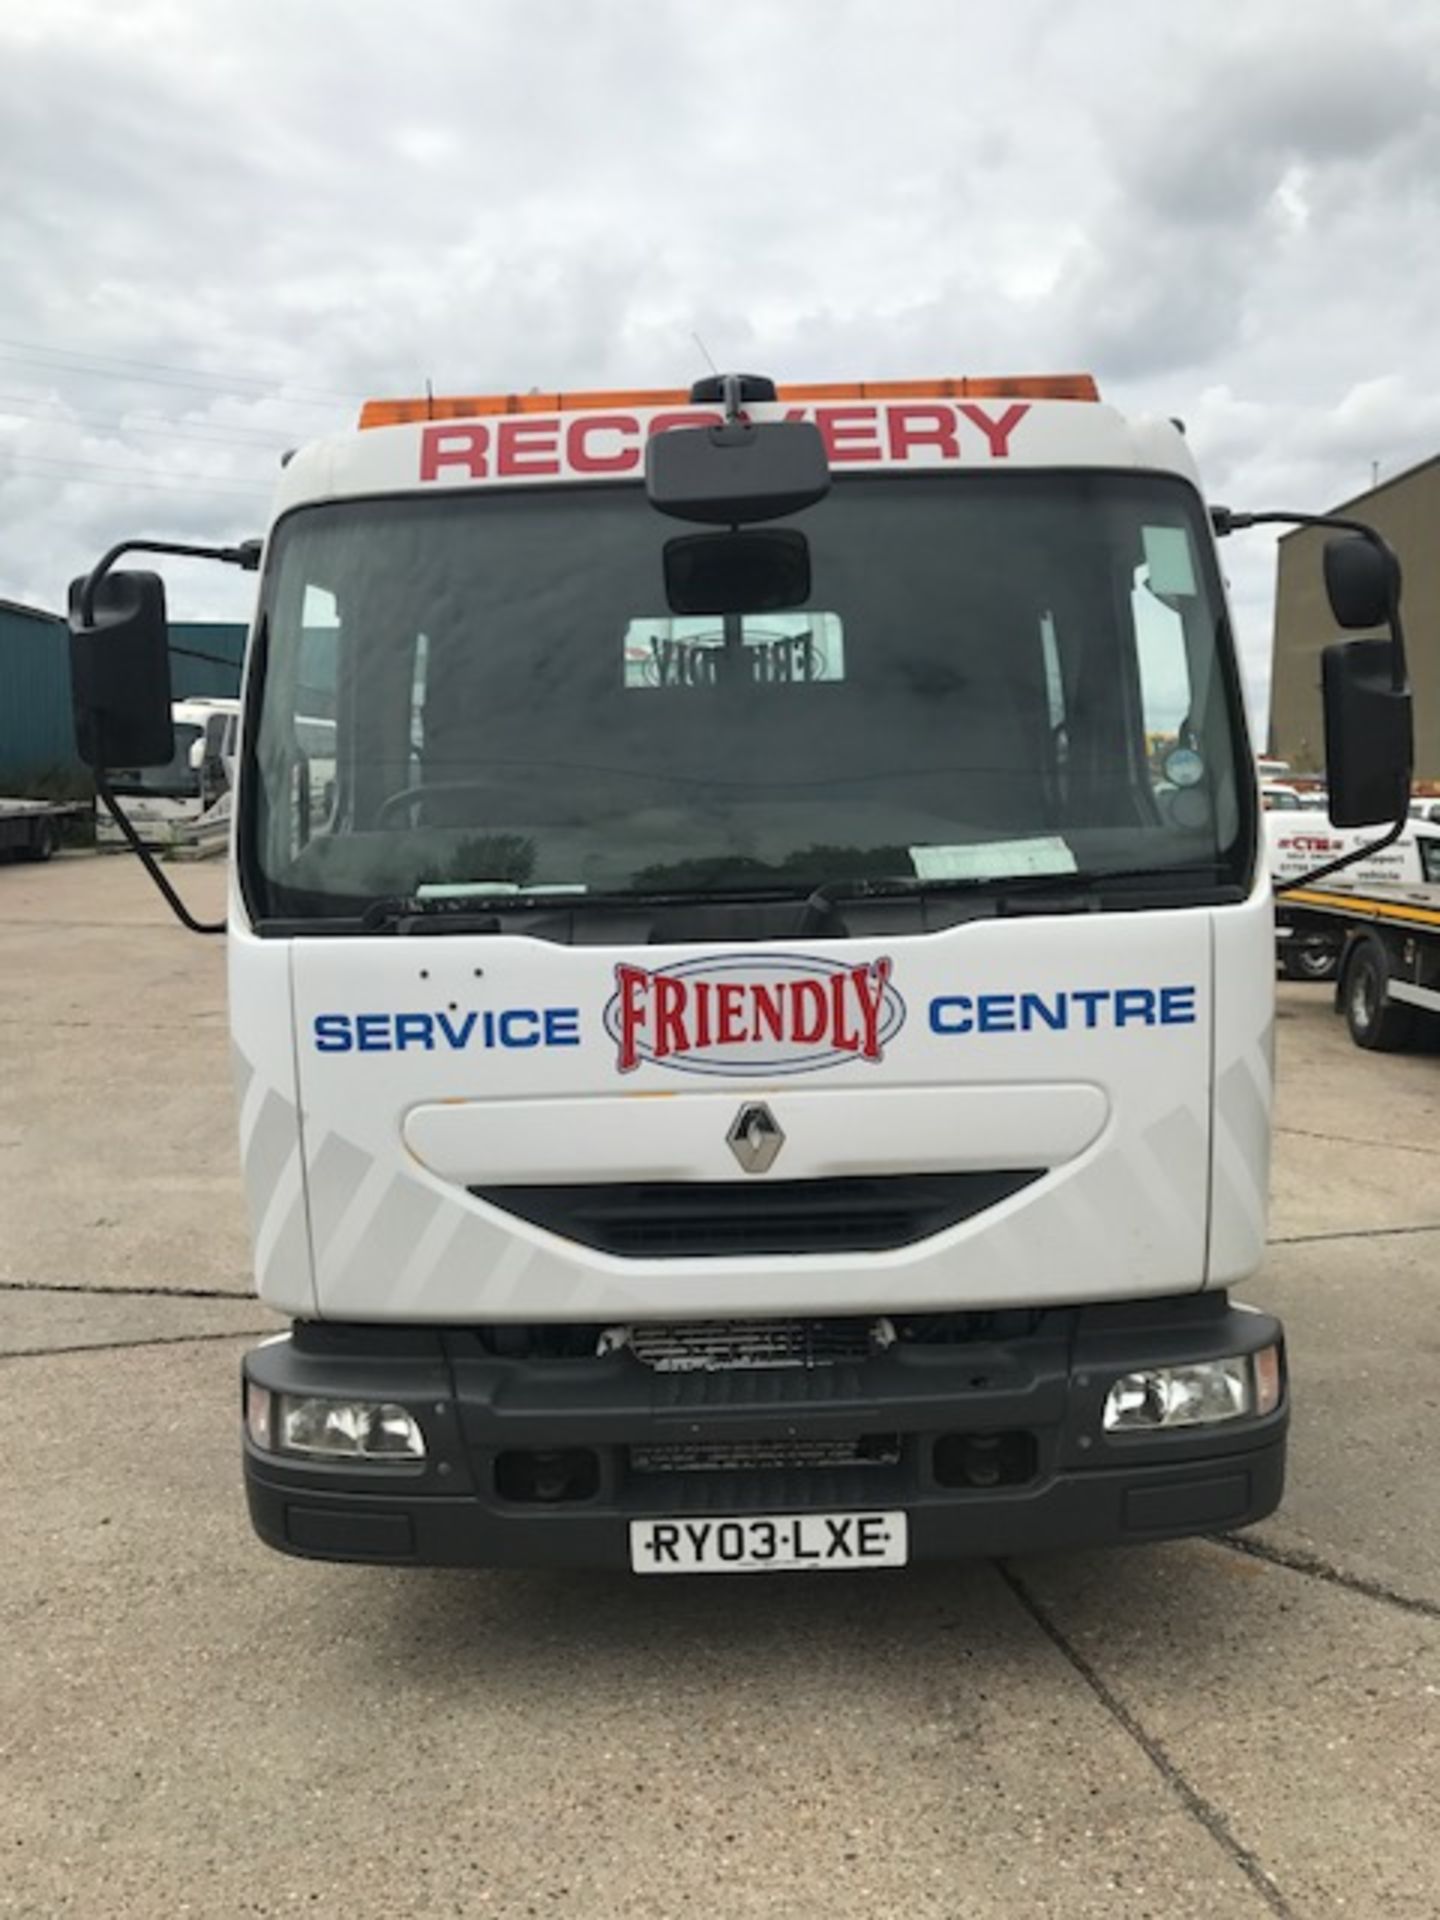 2003 Renault 10t tilt and slide crew cab breakdown recovery vehicle complete with J&J Conversions - Image 3 of 16